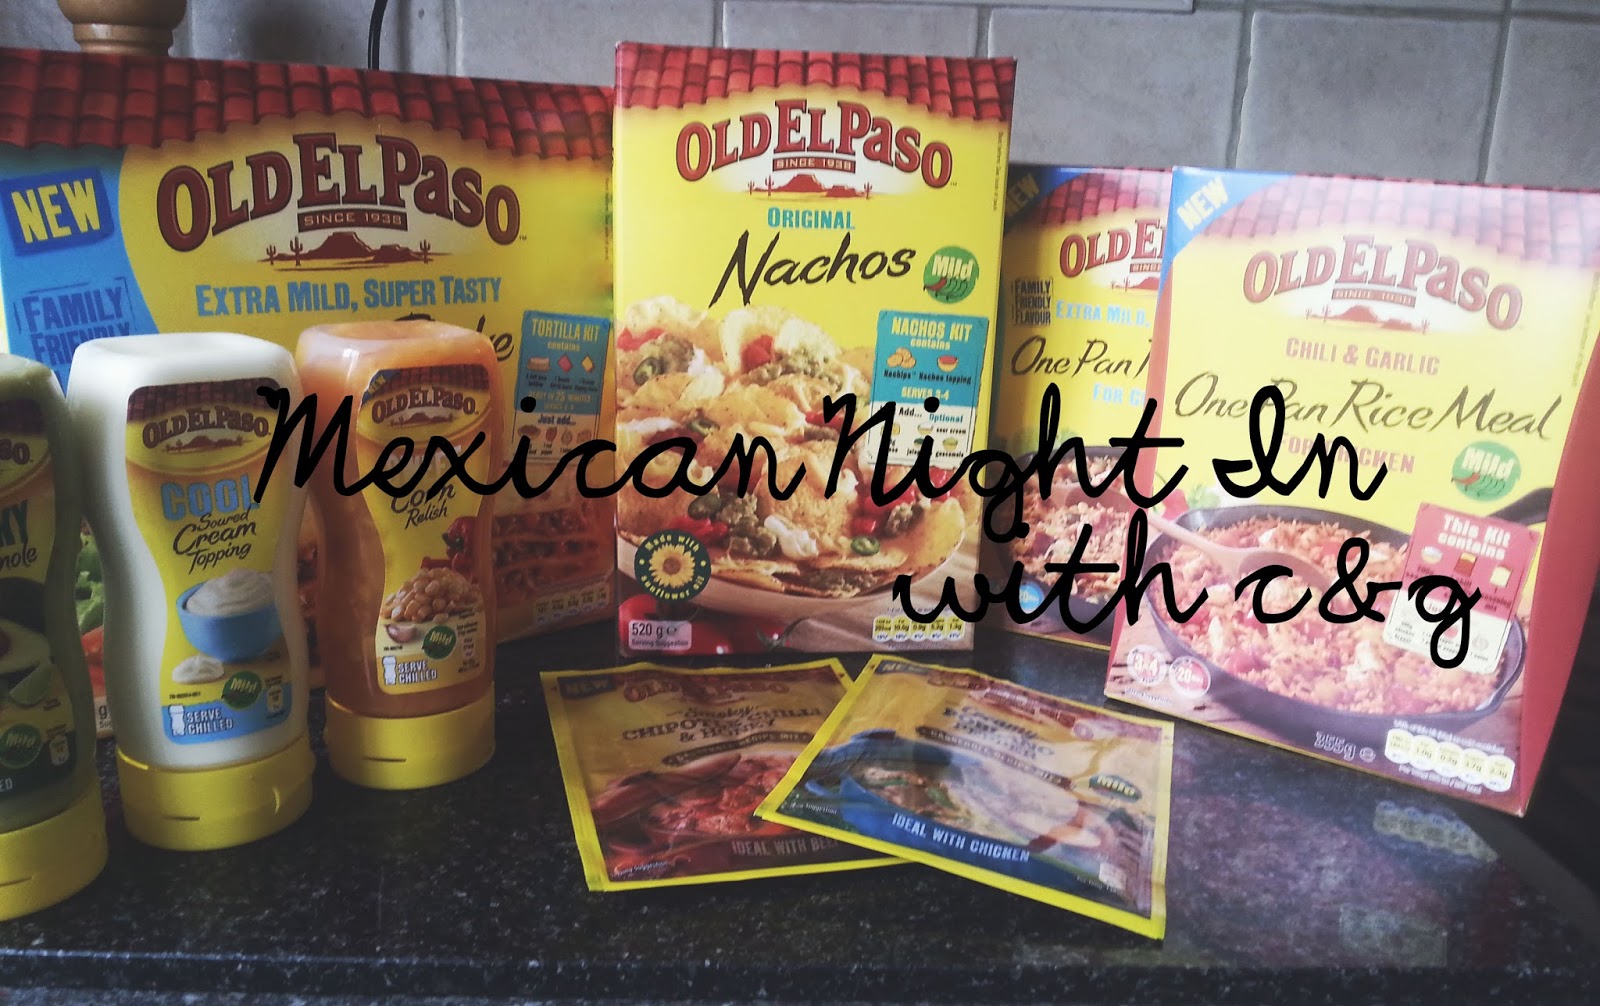 Vegetarian Mexican Dishes with Old El Paso